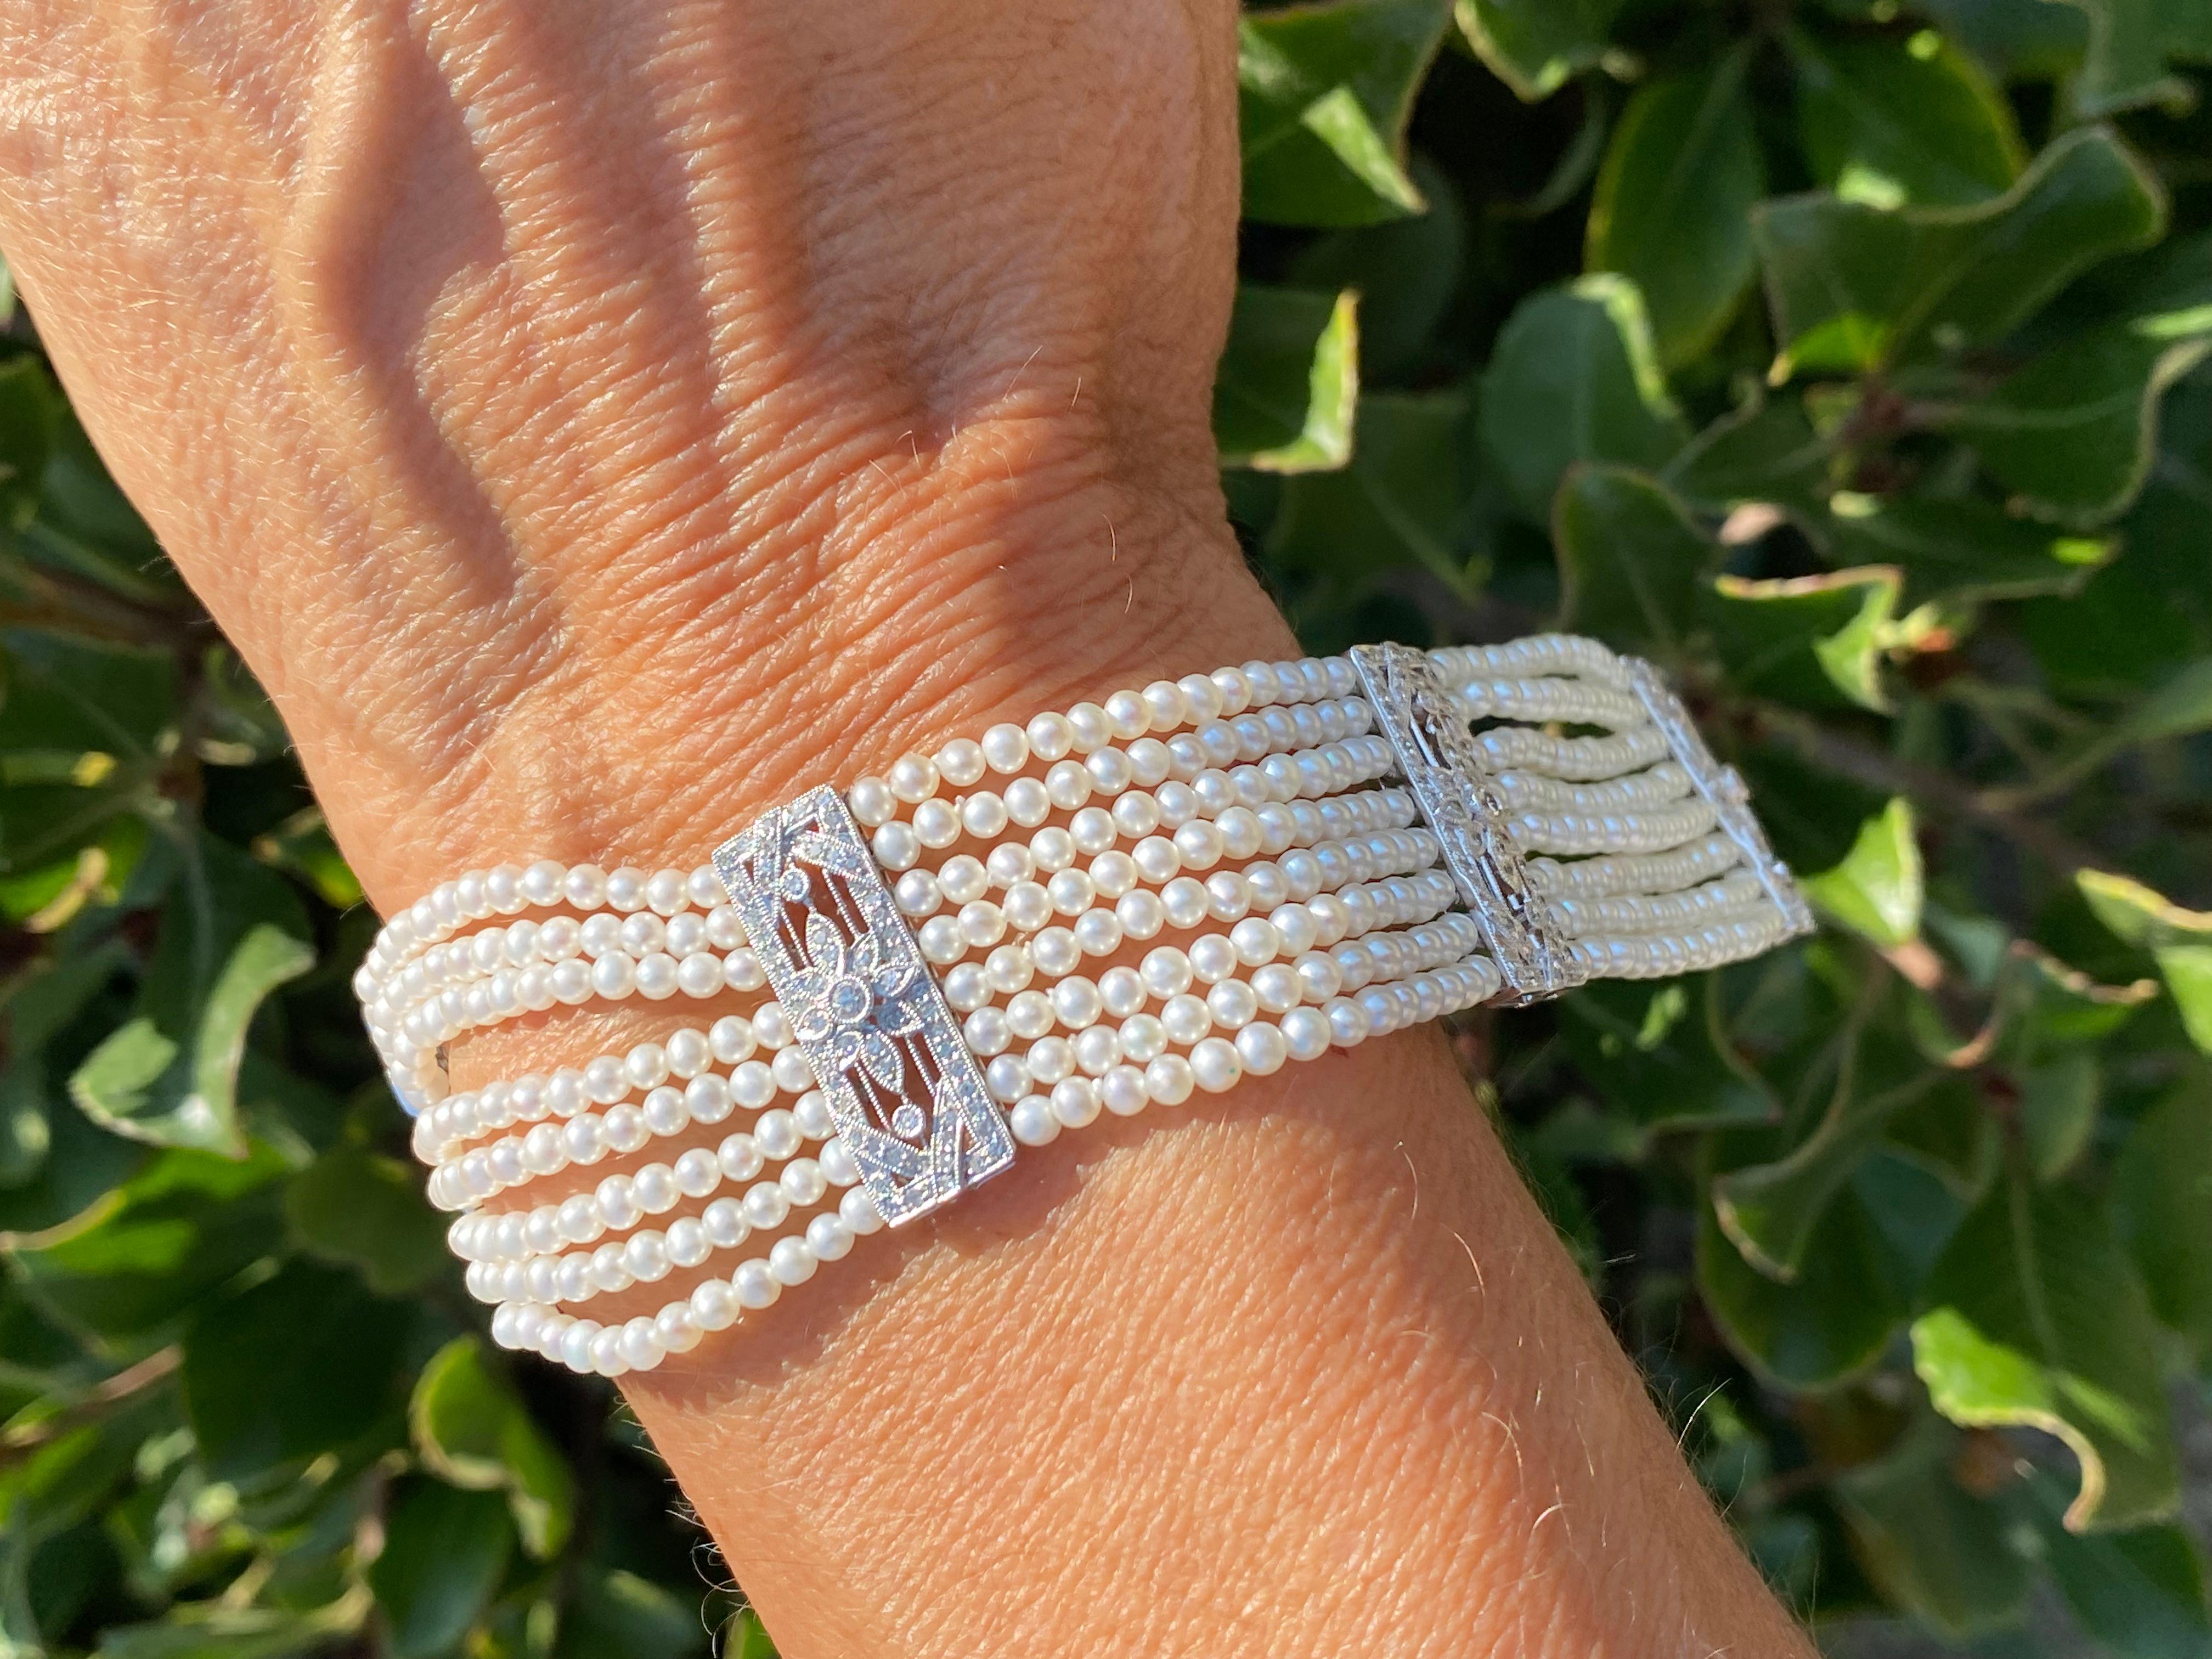 8 Strand Pearl and Diamond Bracelet

This spectacular platinum and diamond pearl bracelet is made with the finest AAA pearls and diamonds

Eight strands of perfectly matched pearls measure 2.5 mm each and are attached by four Ornate diamond